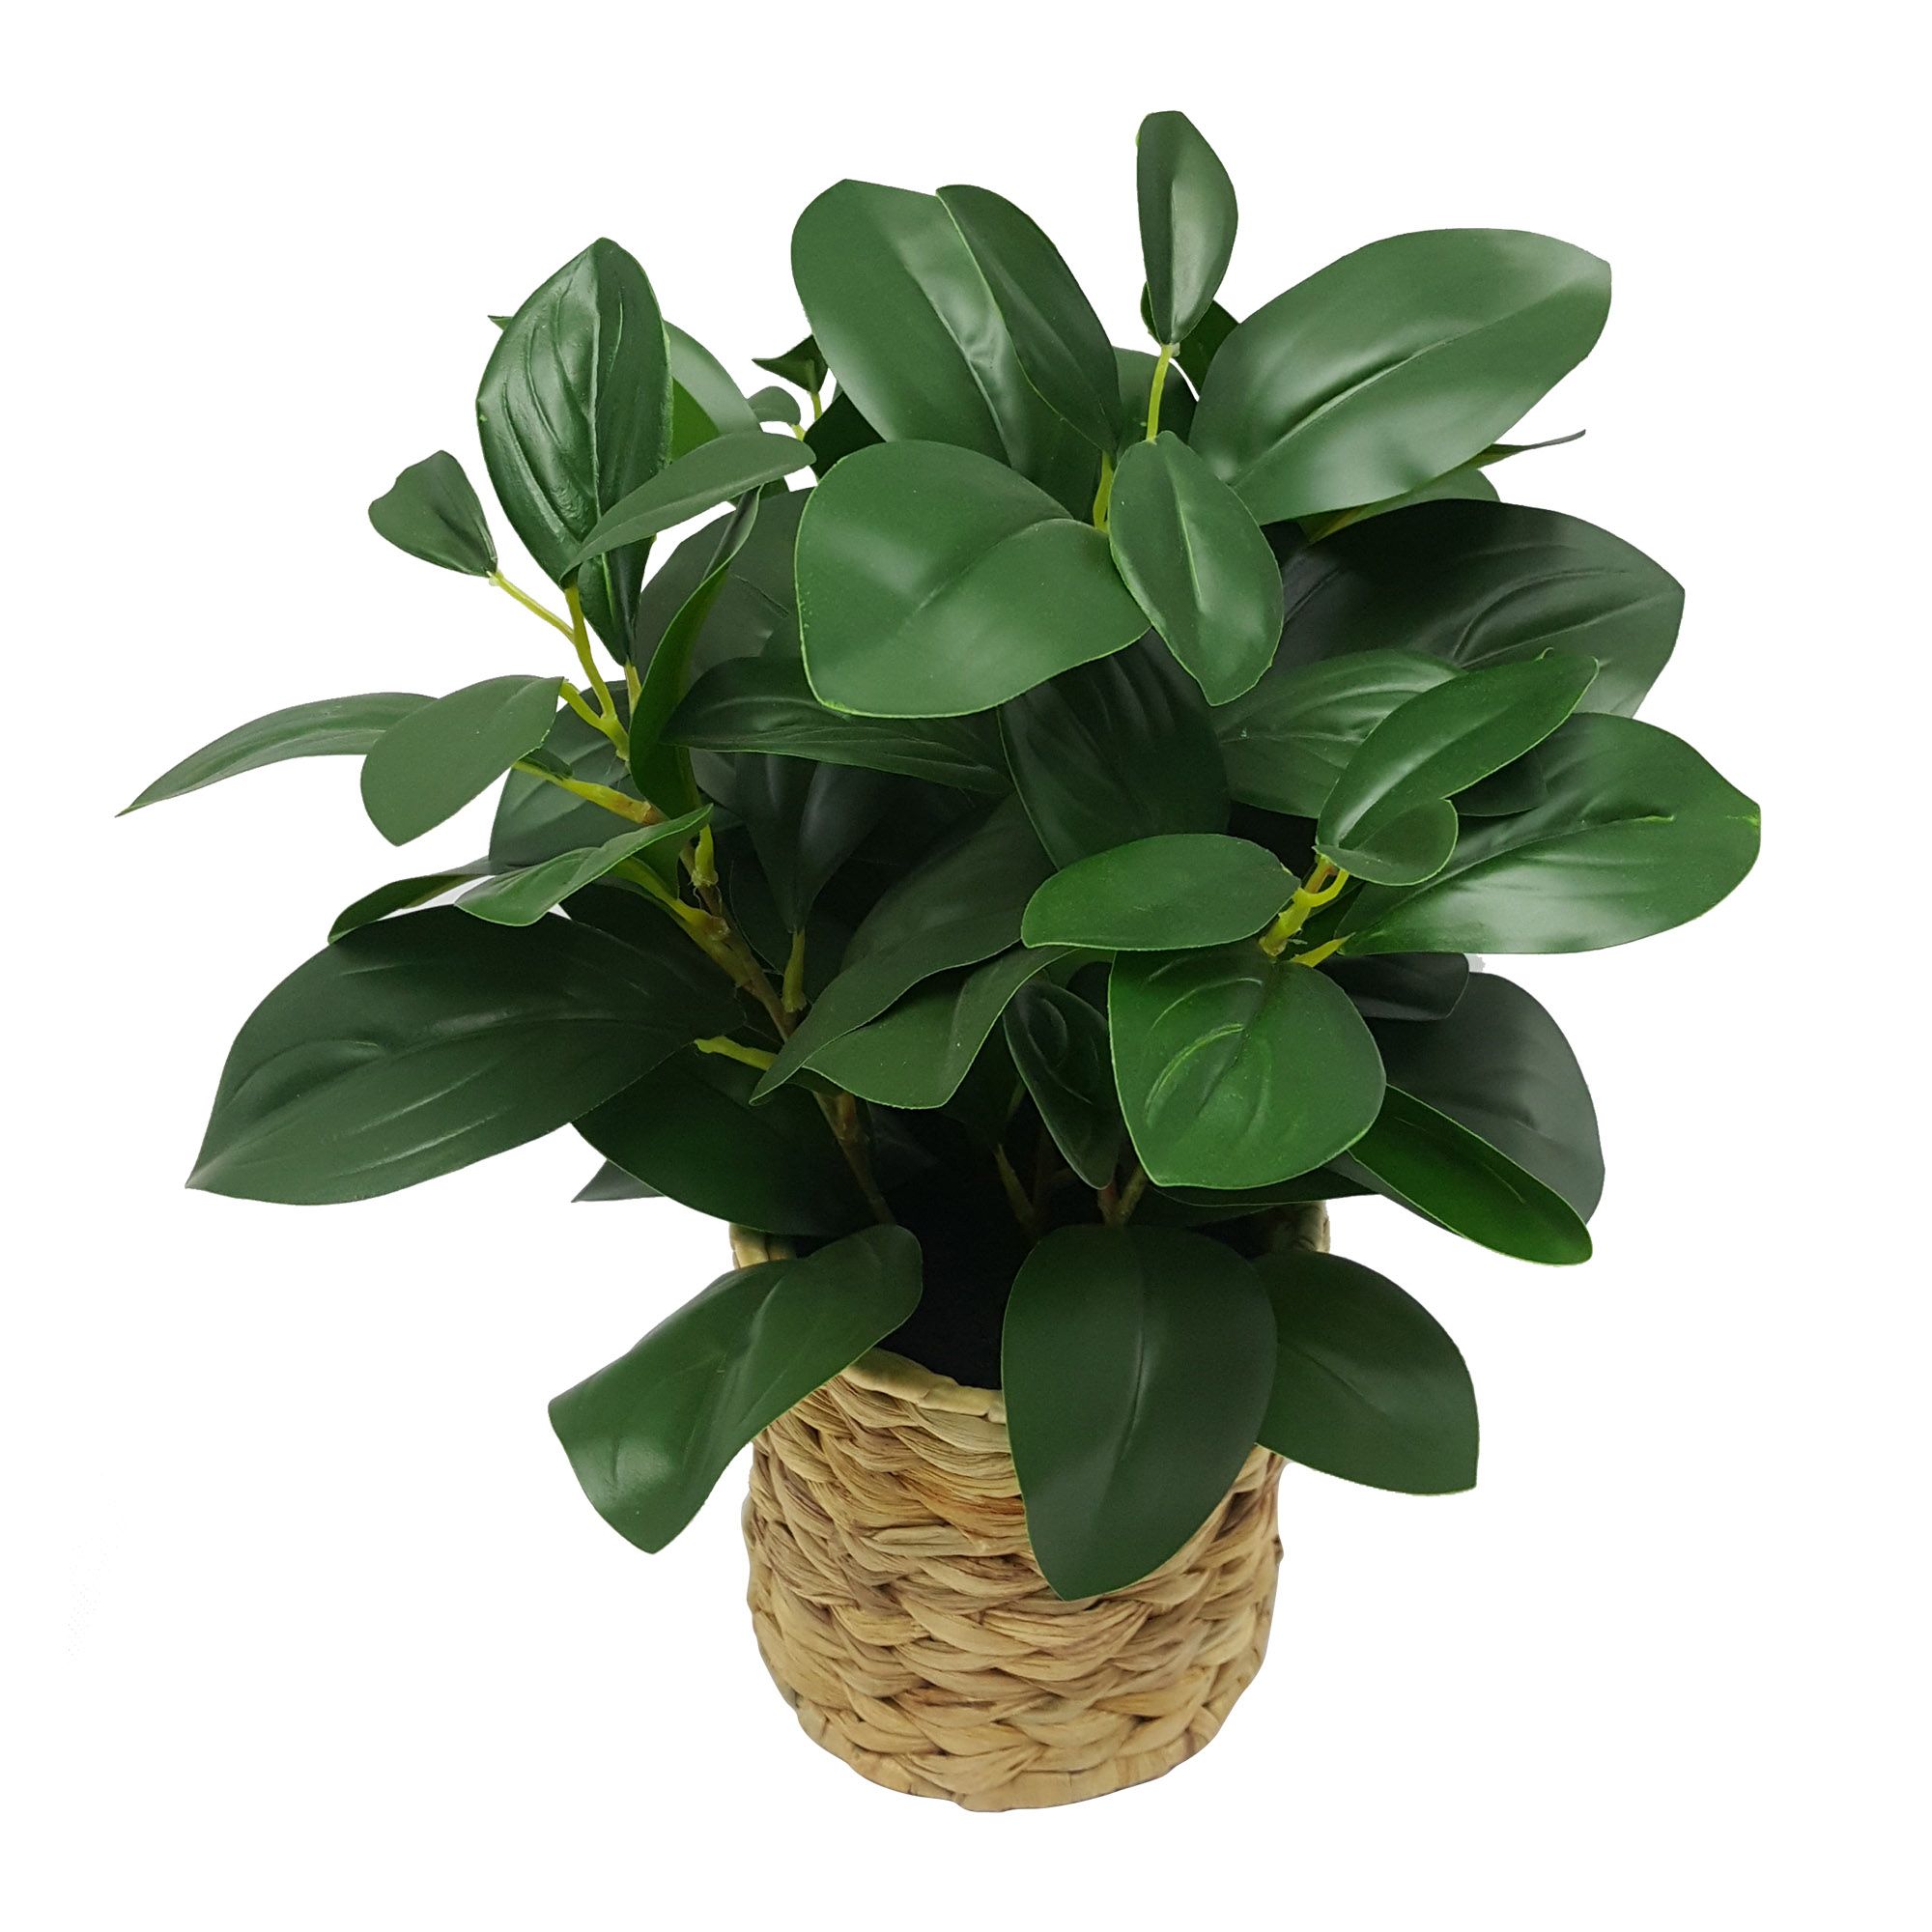 Better Homes & Gardens 13" Artificial Peperomia Plant in Natural Wicker Basket - image 4 of 5